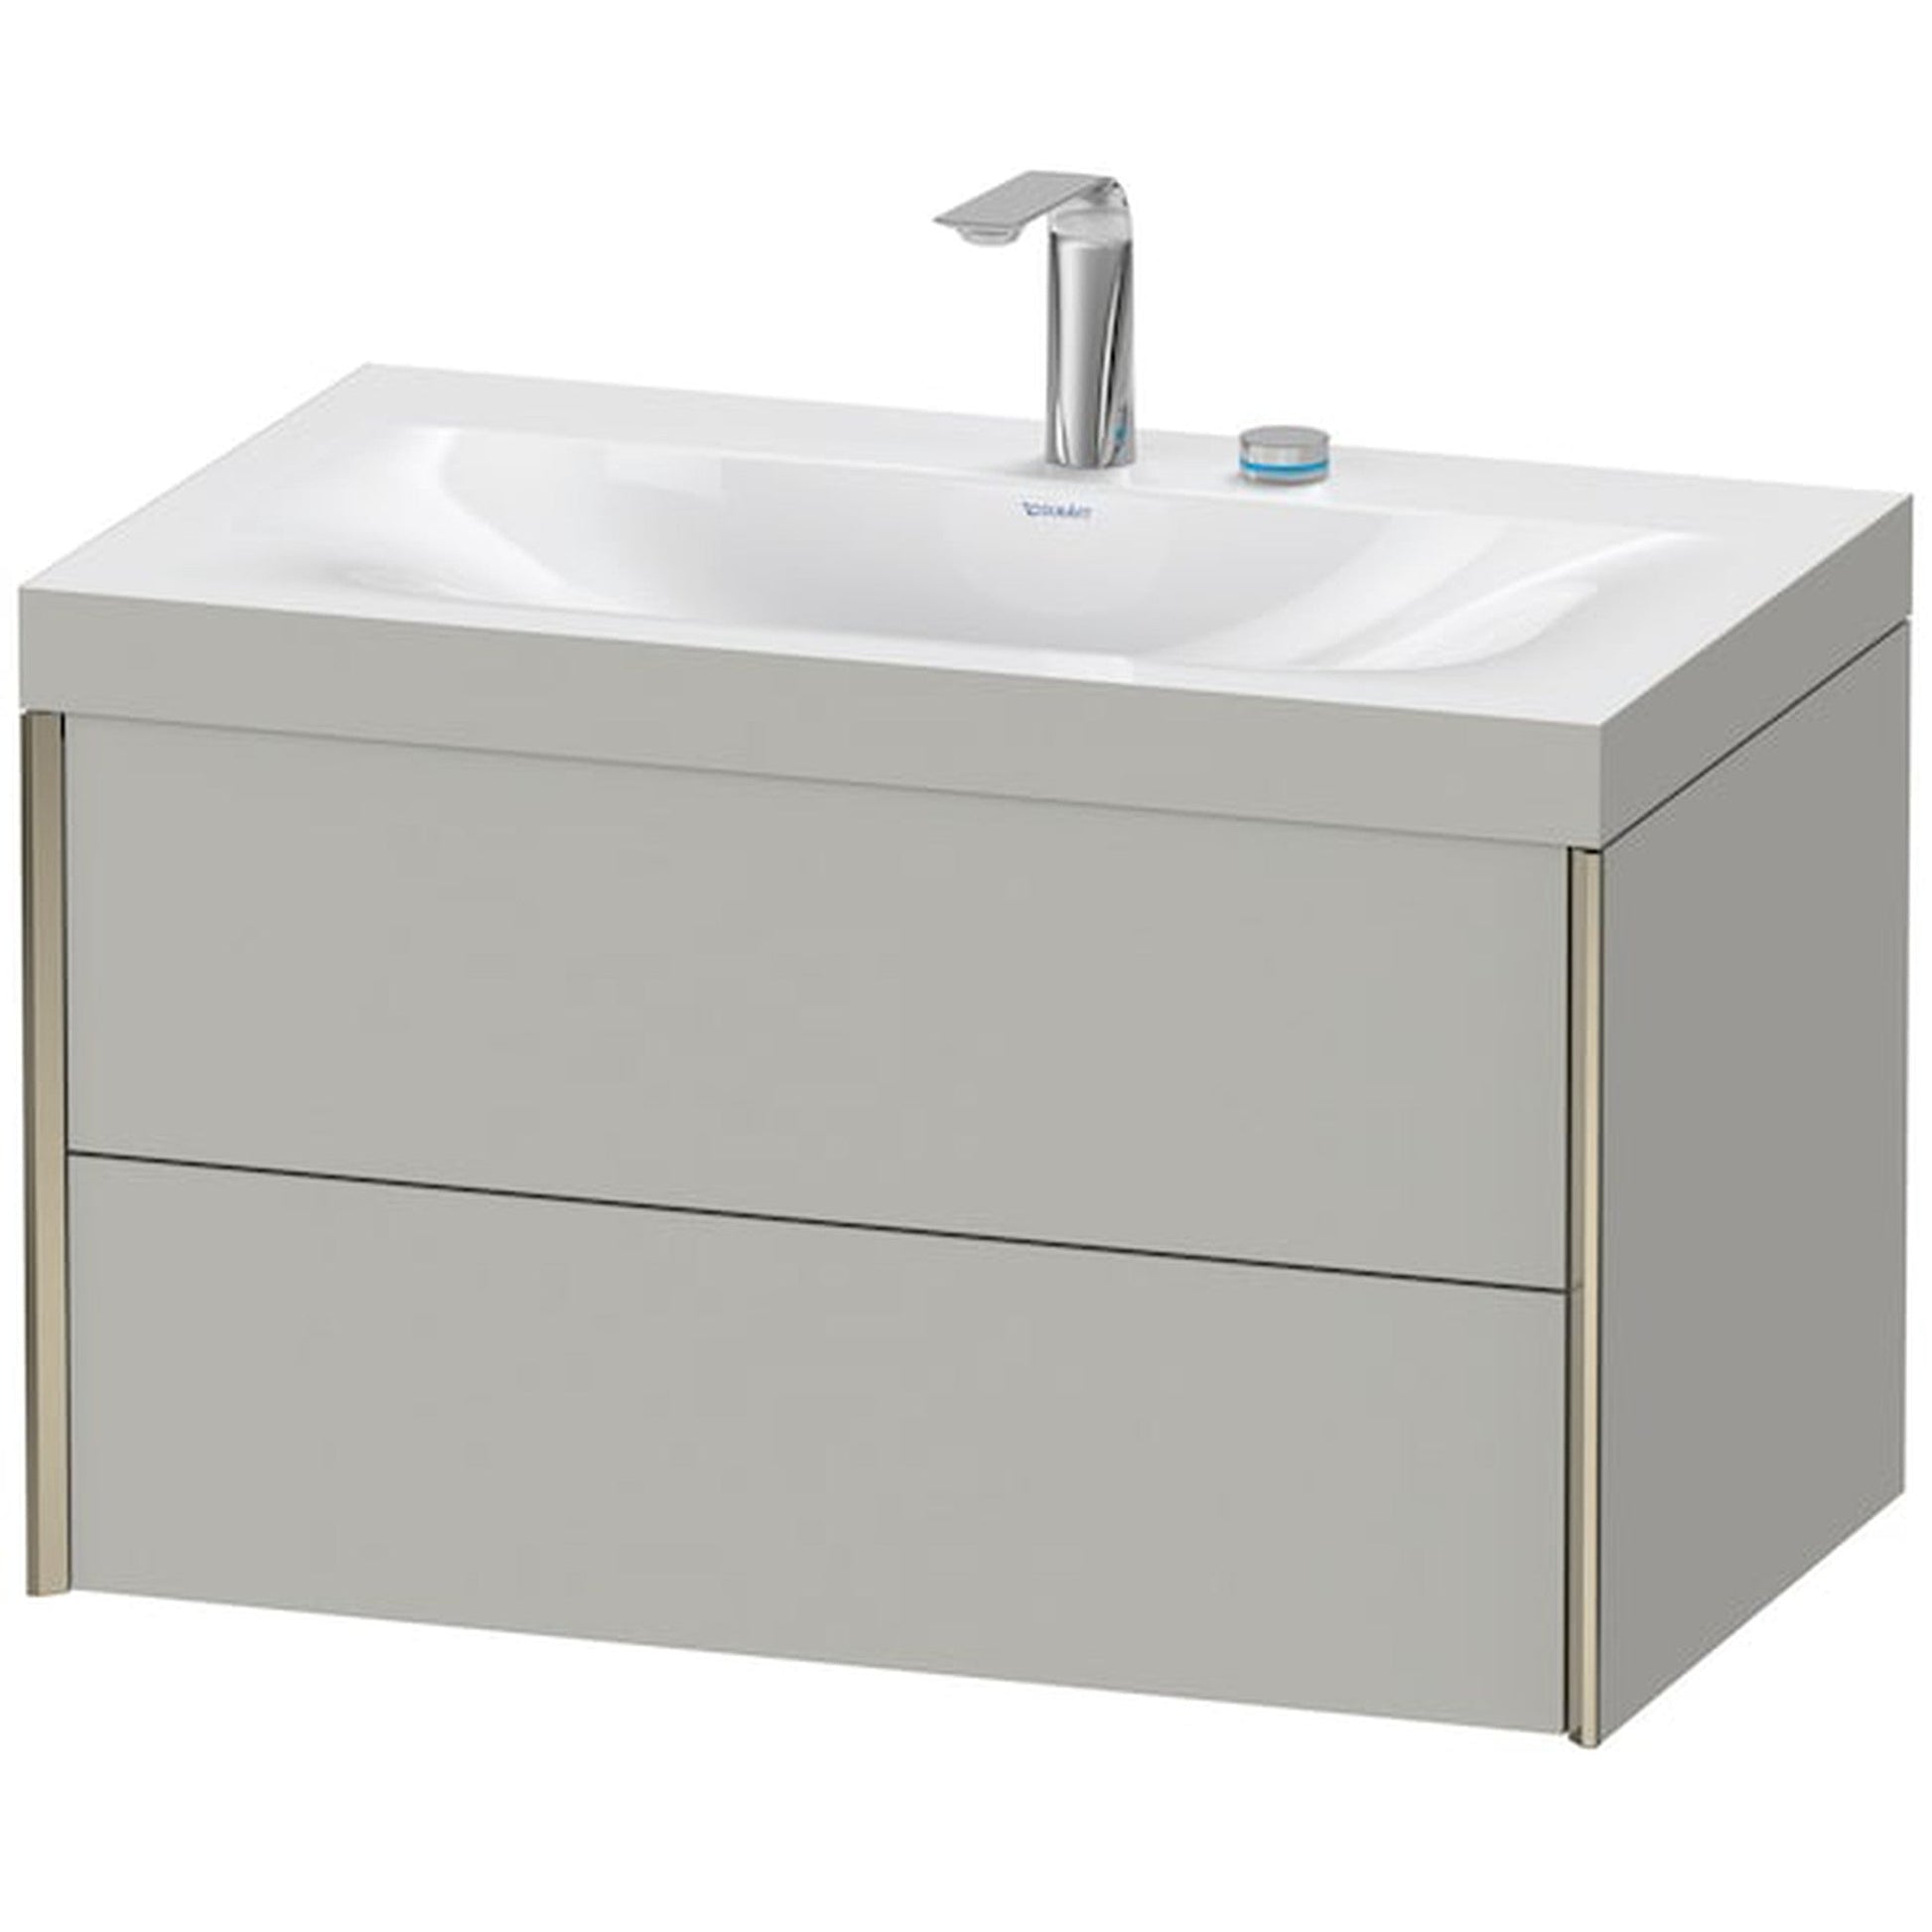 Duravit Xviu 31" x 20" x 19" Two Drawer C-Bonded Wall-Mount Vanity Kit With Two Tap Holes, Concrete Gray (XV4615EB107C)